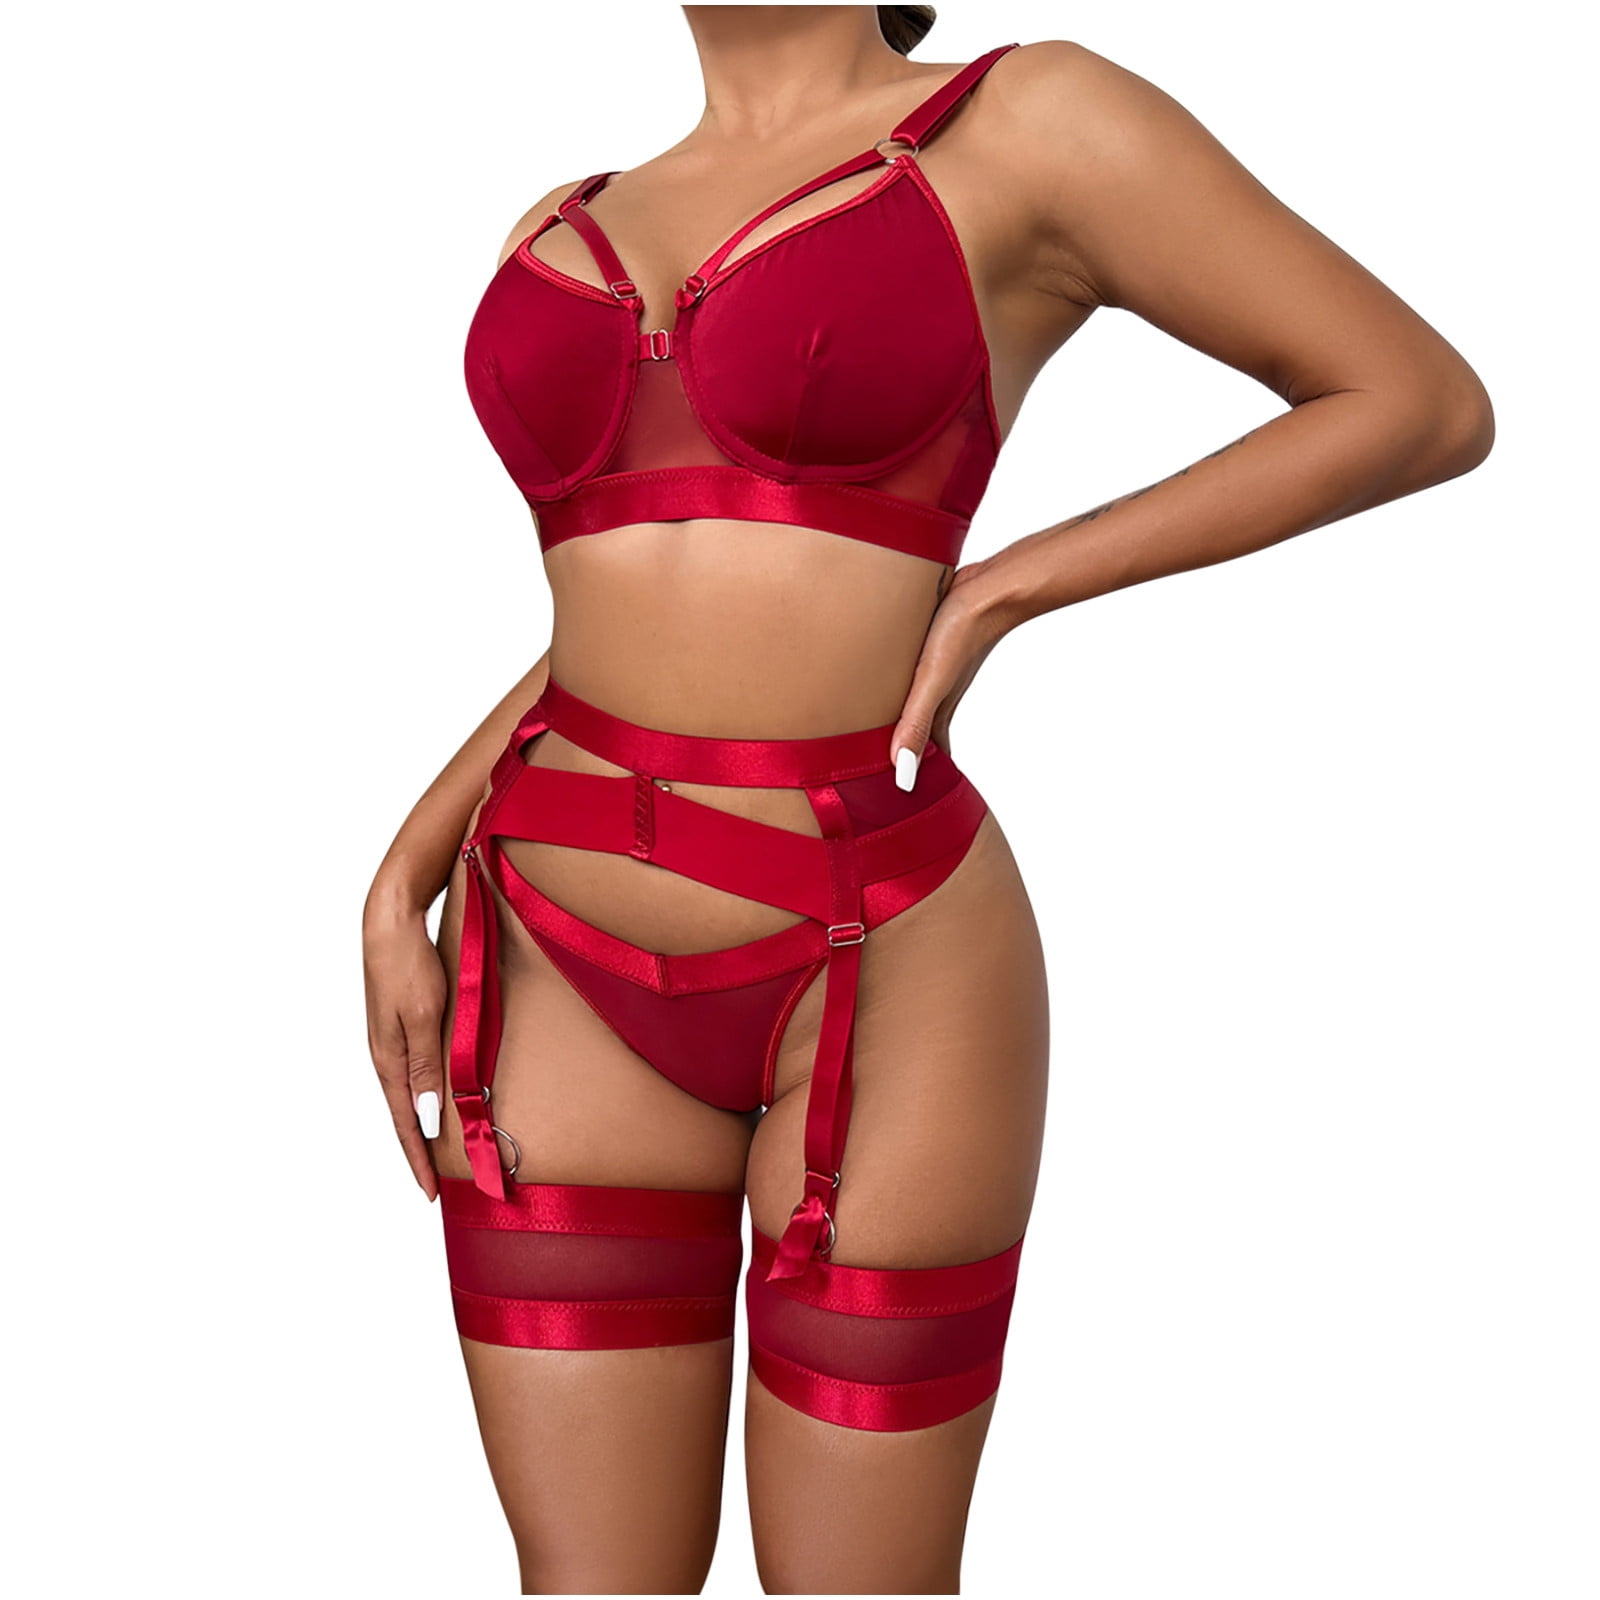 RQYYD Clearance Lingerie for Women 3 Piece Lingerie Set with